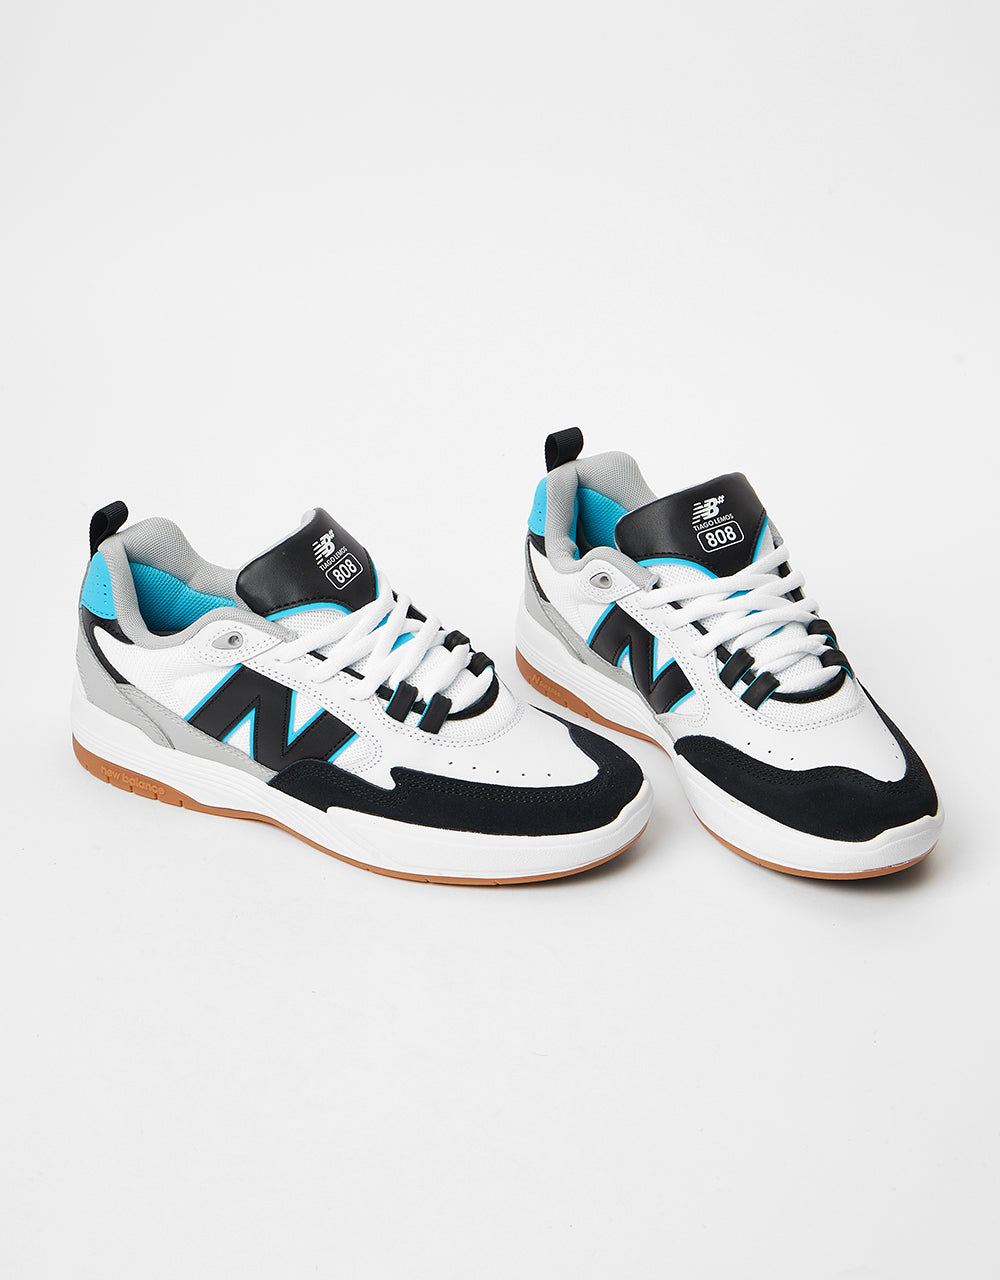 New Balance Numeric 808 Skate Shoes - White/Teal